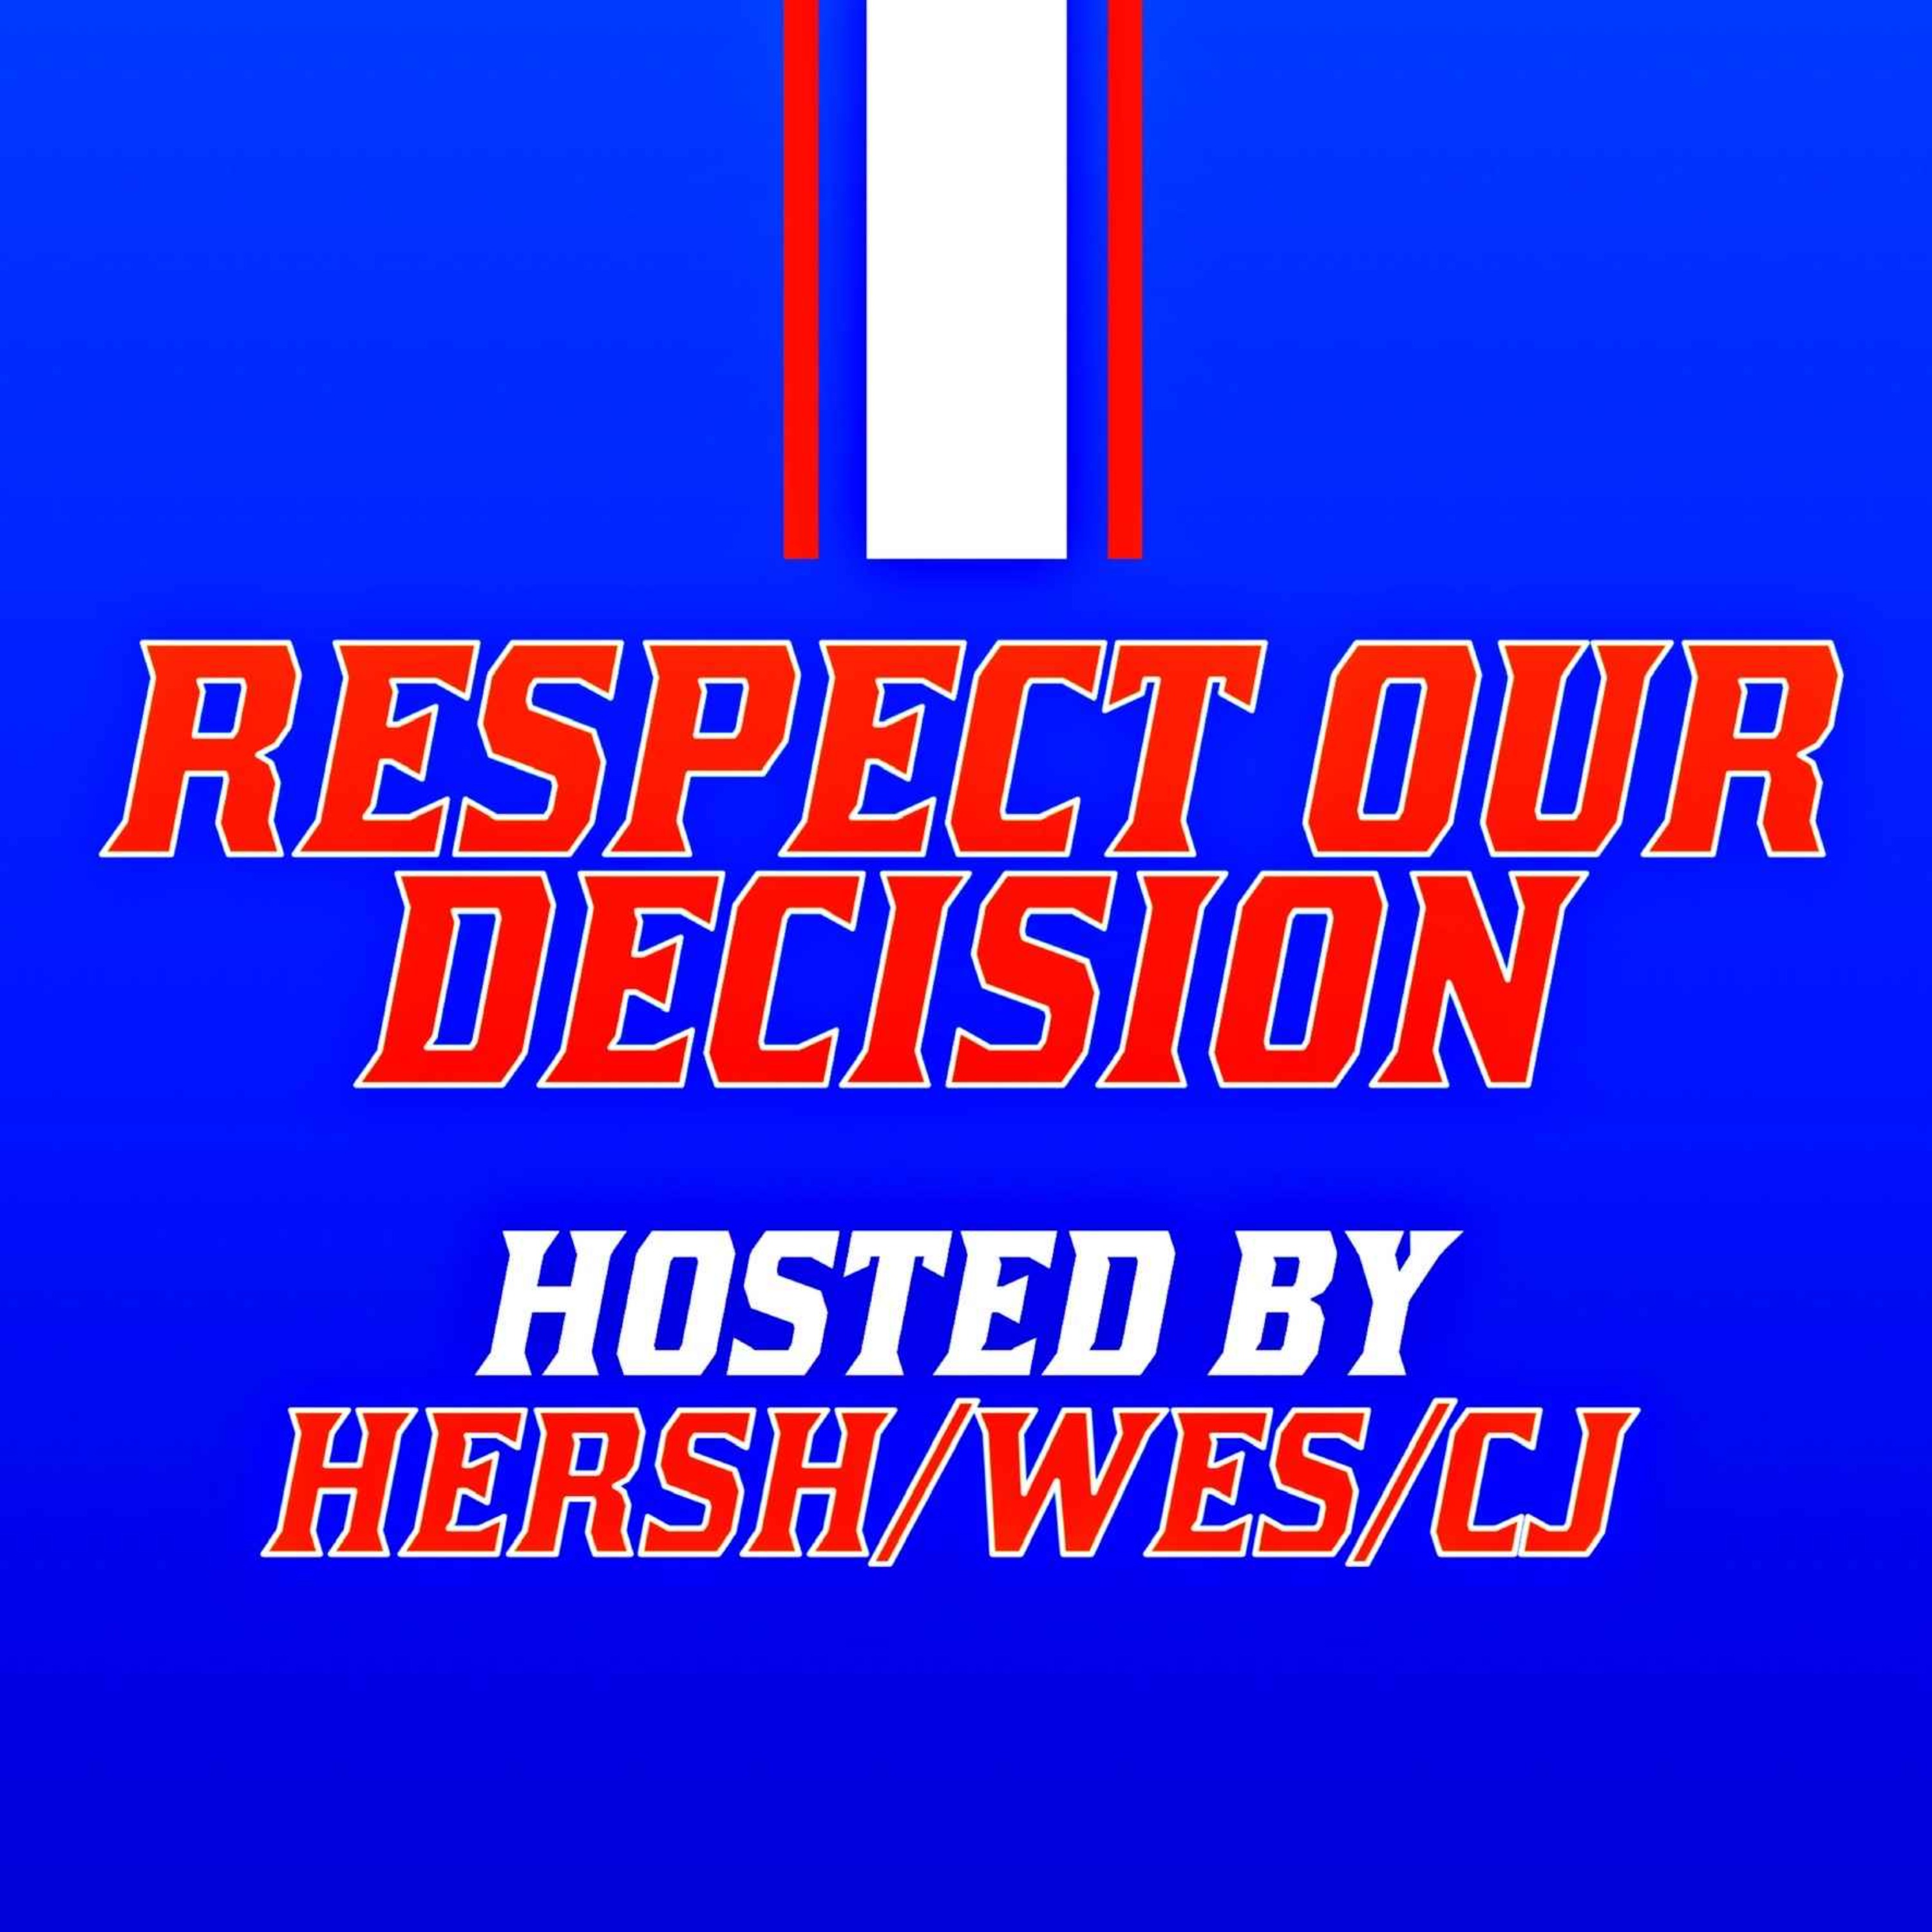 Respect Our Decision: A Florida Gators Recruiting and More Podcast